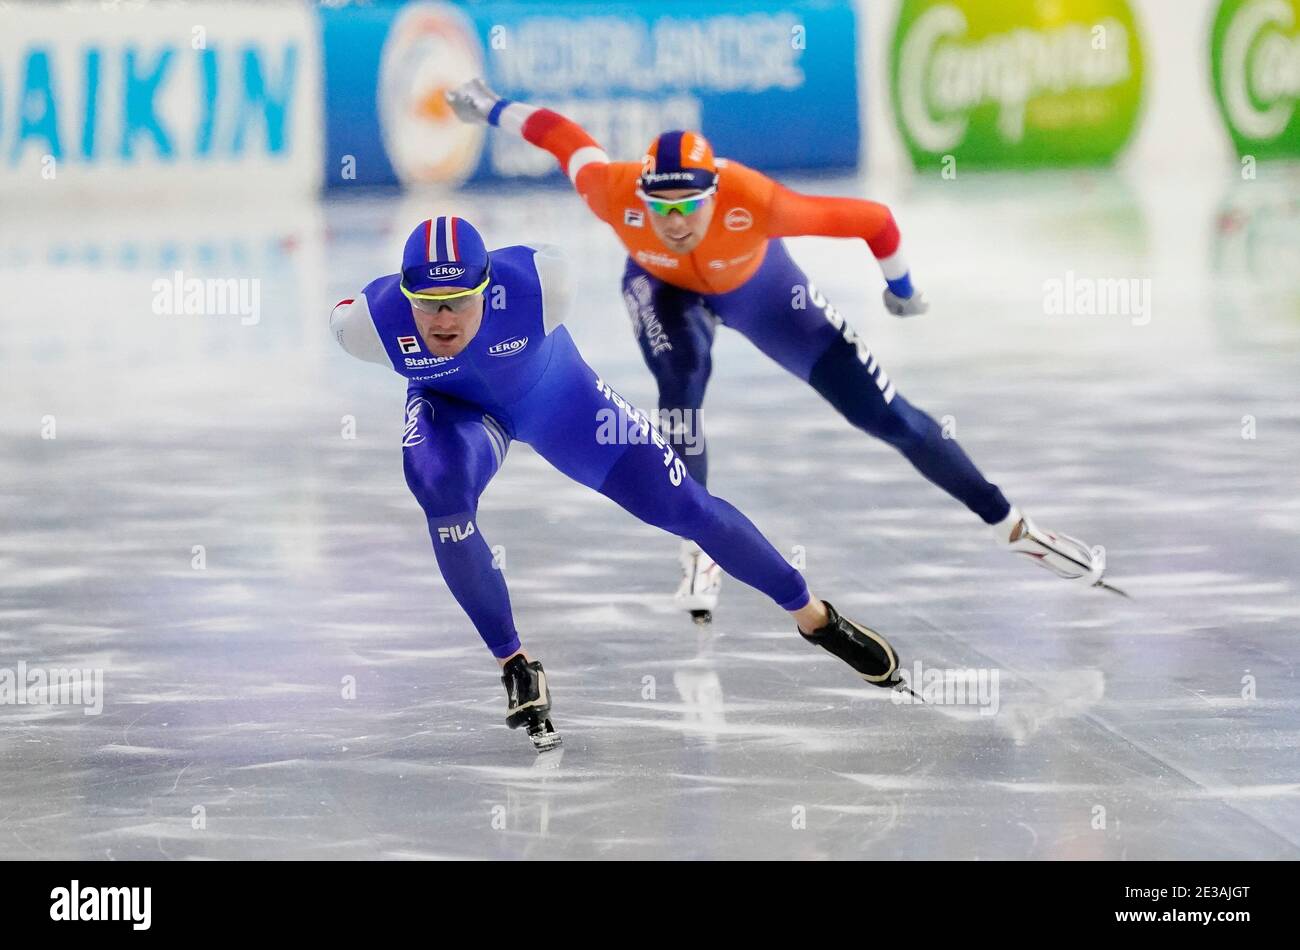 Sverre Lunde Pedersen (NOR) vs Patrick Roest (NED) on 1500 meters during European Championship Allround and Sprint on January, 17 2021 in Heerenveen Netherlands Credit: SCS/Soenar Chamid/AFLO/Alamy Live News Stock Photo